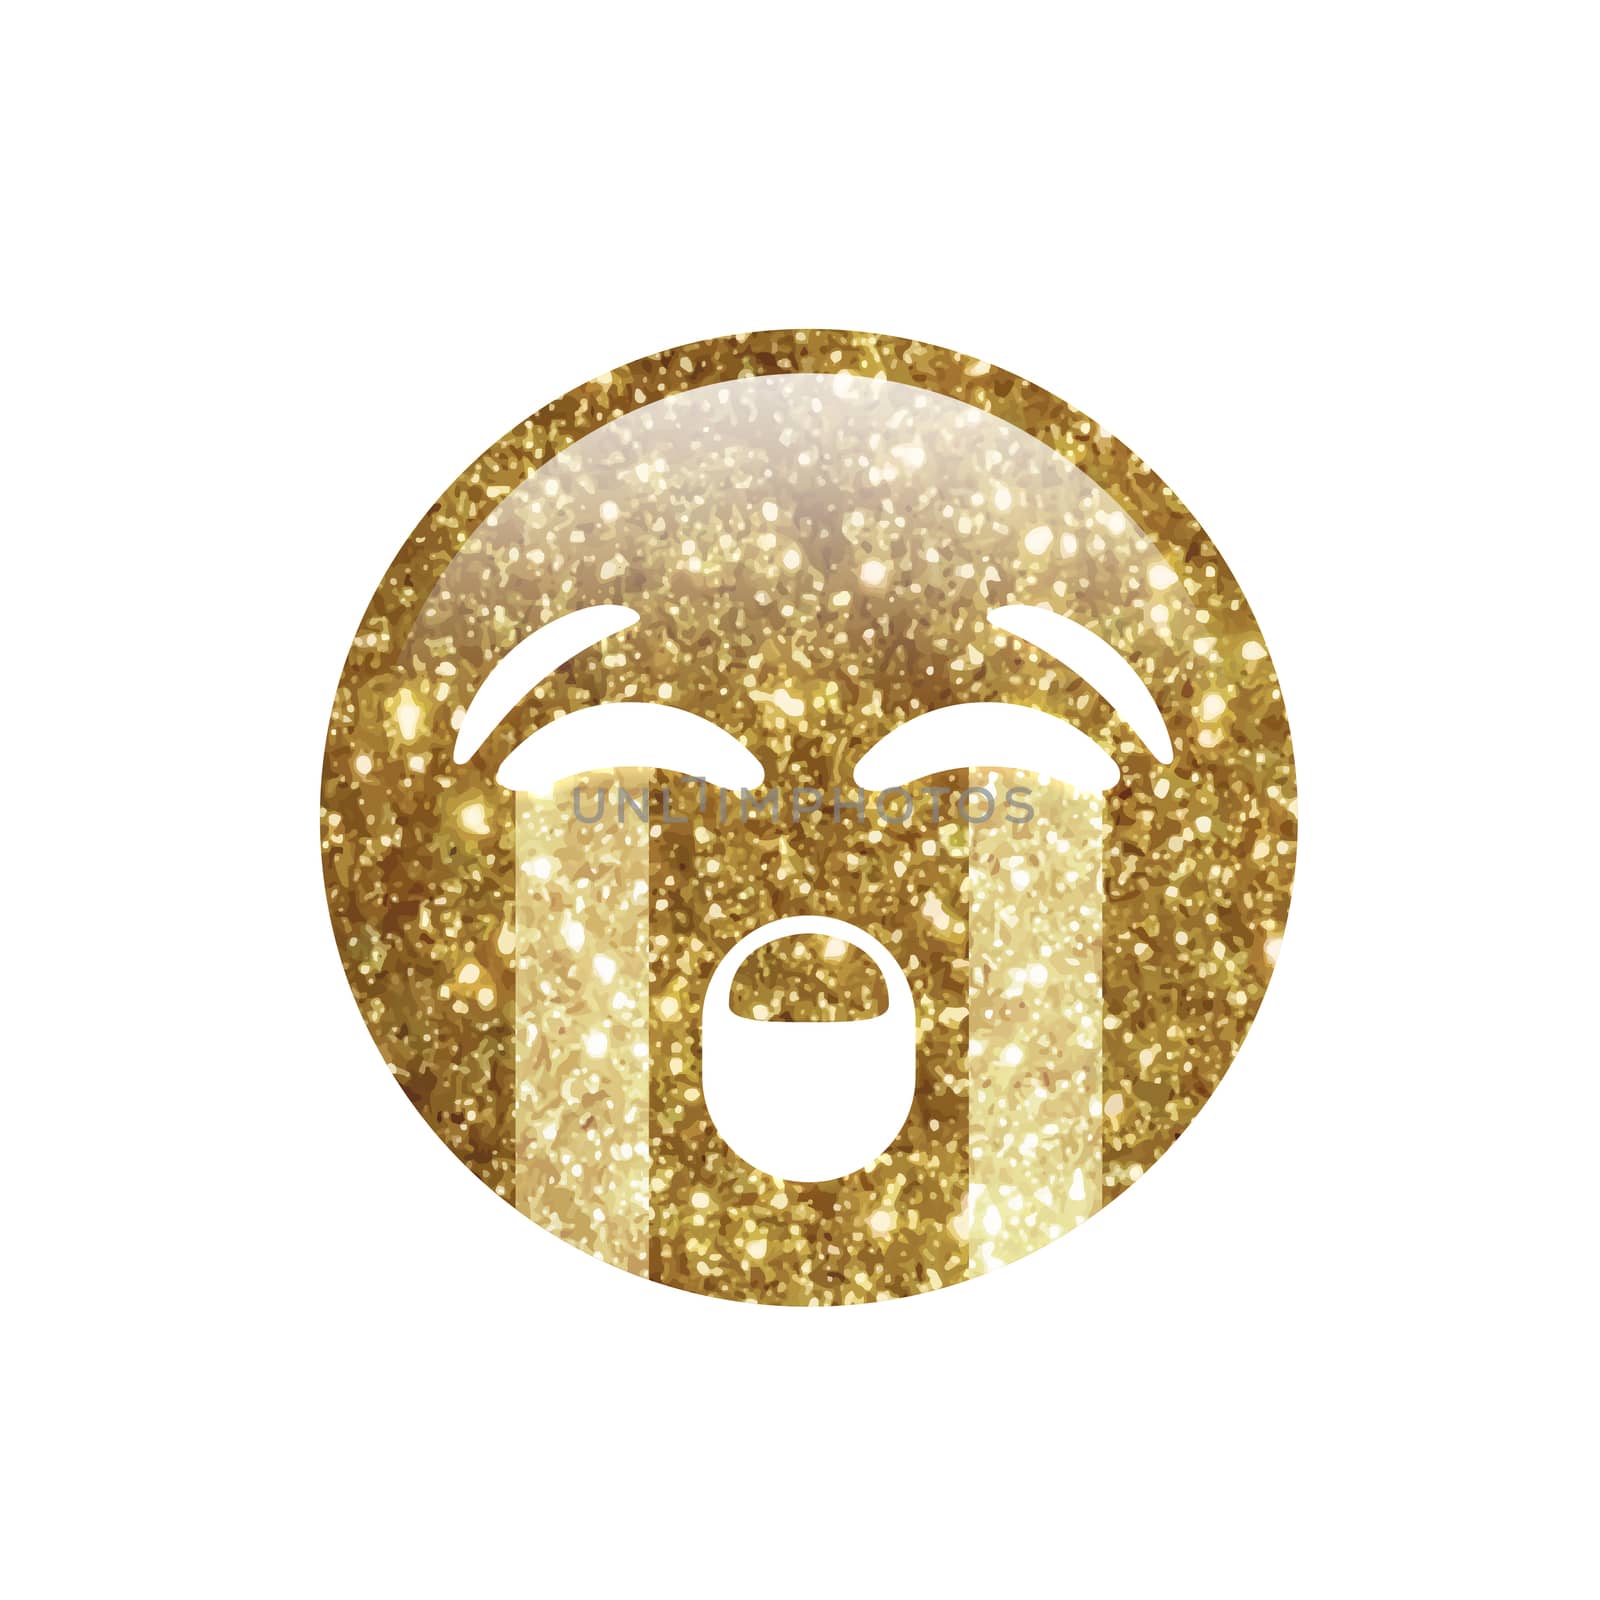 Golden glitter emoji sad face with crying tear icon by cougarsan